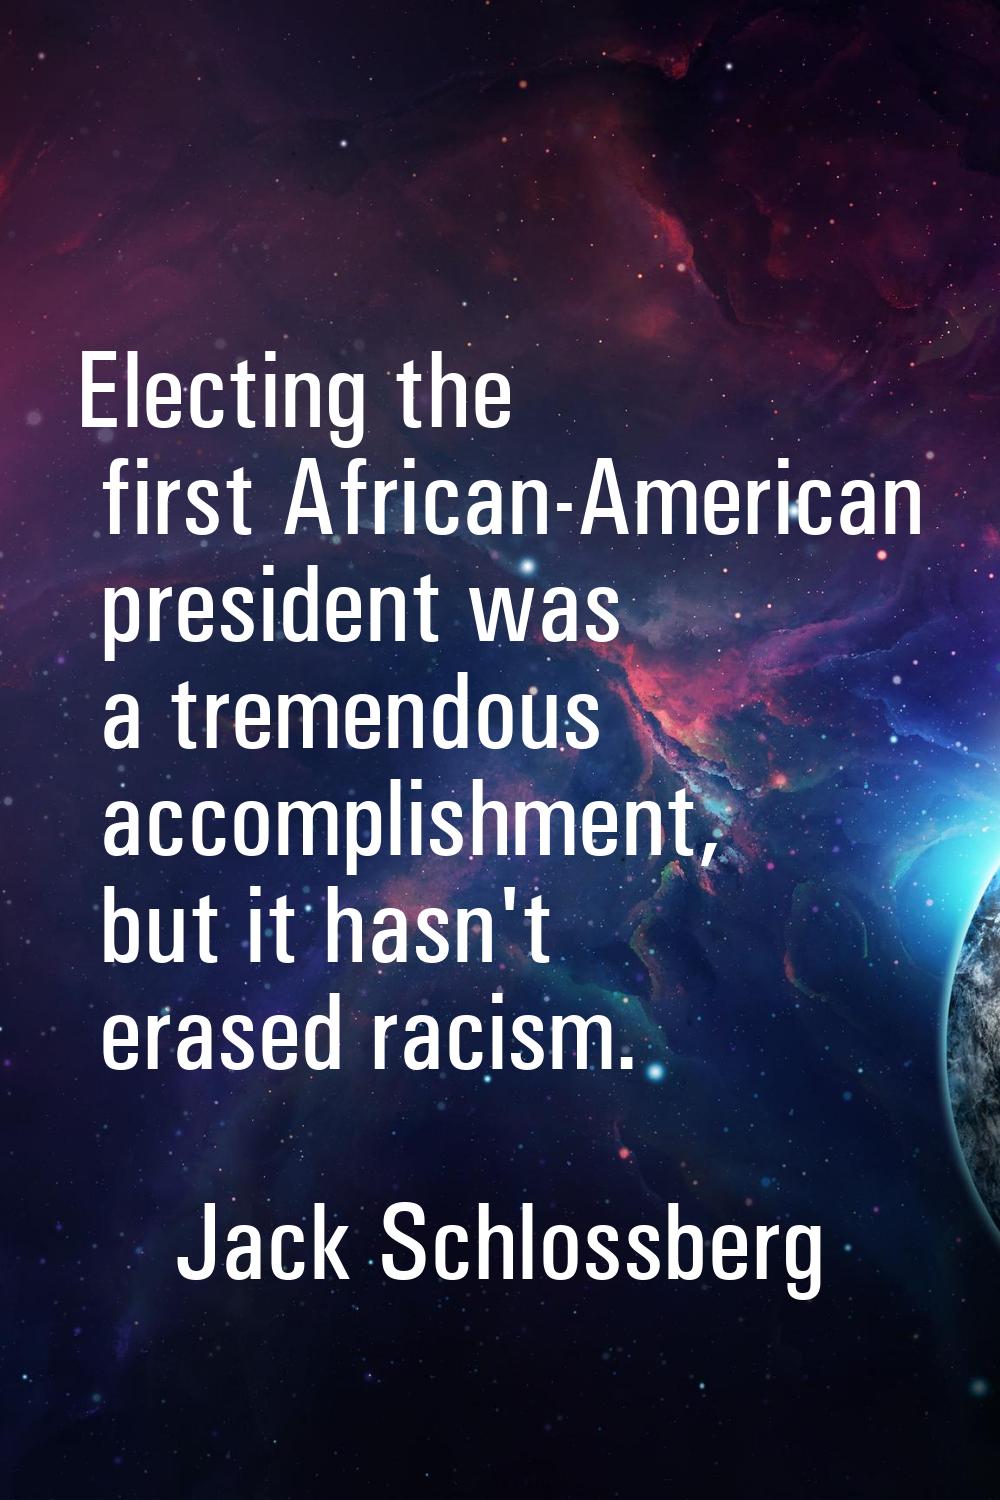 Electing the first African-American president was a tremendous accomplishment, but it hasn't erased